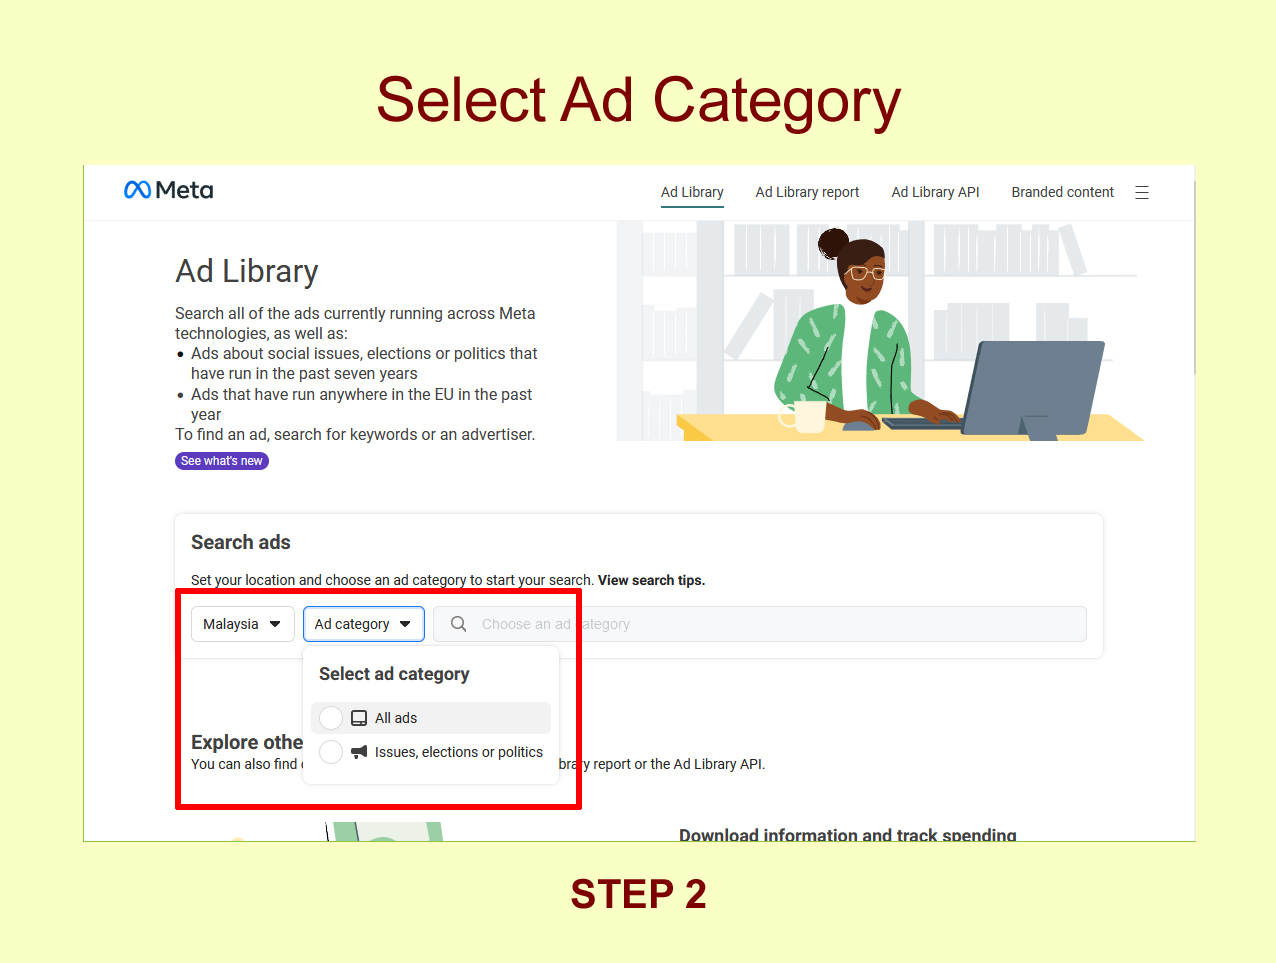 Step 2 - Go to Ad Category